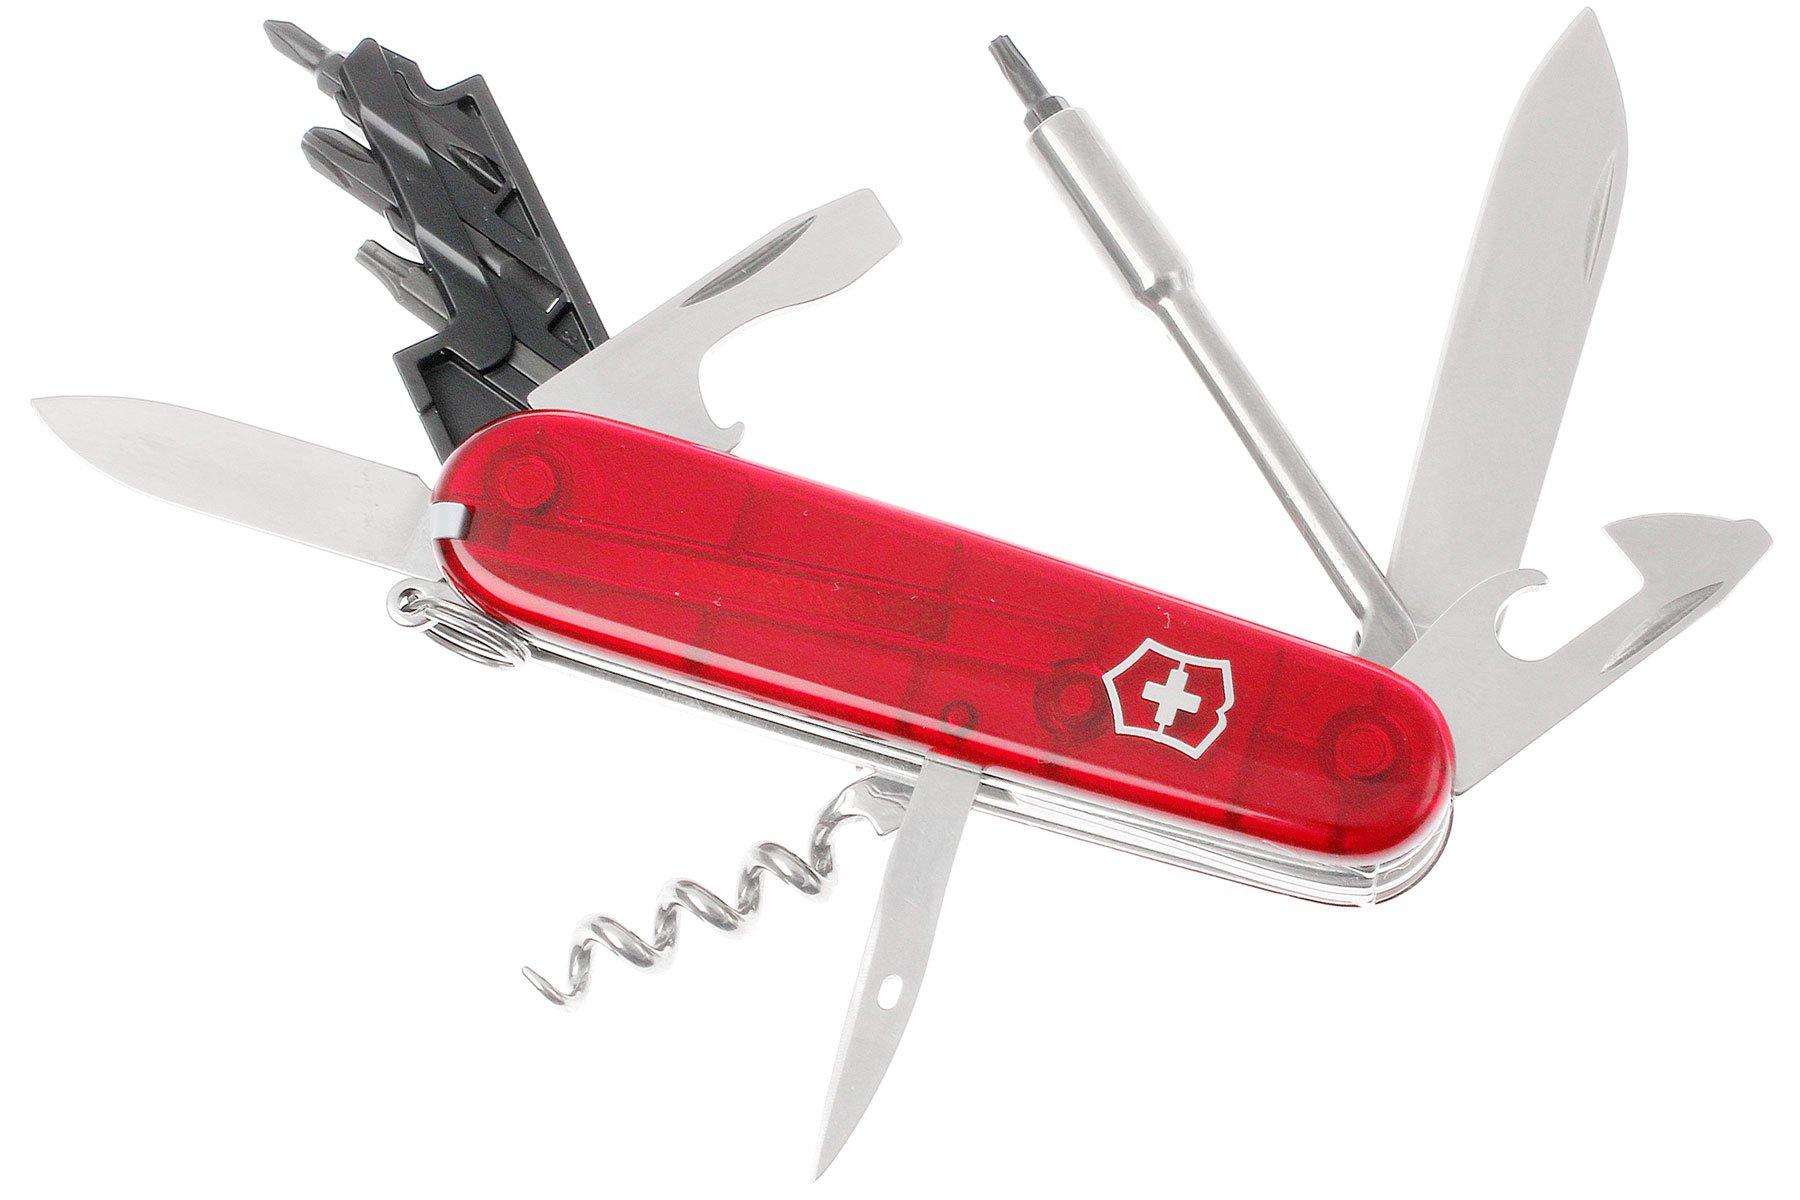 shopping　transparent　Victorinox　29　functions,　Advantageously　CyberTool　at　with　red